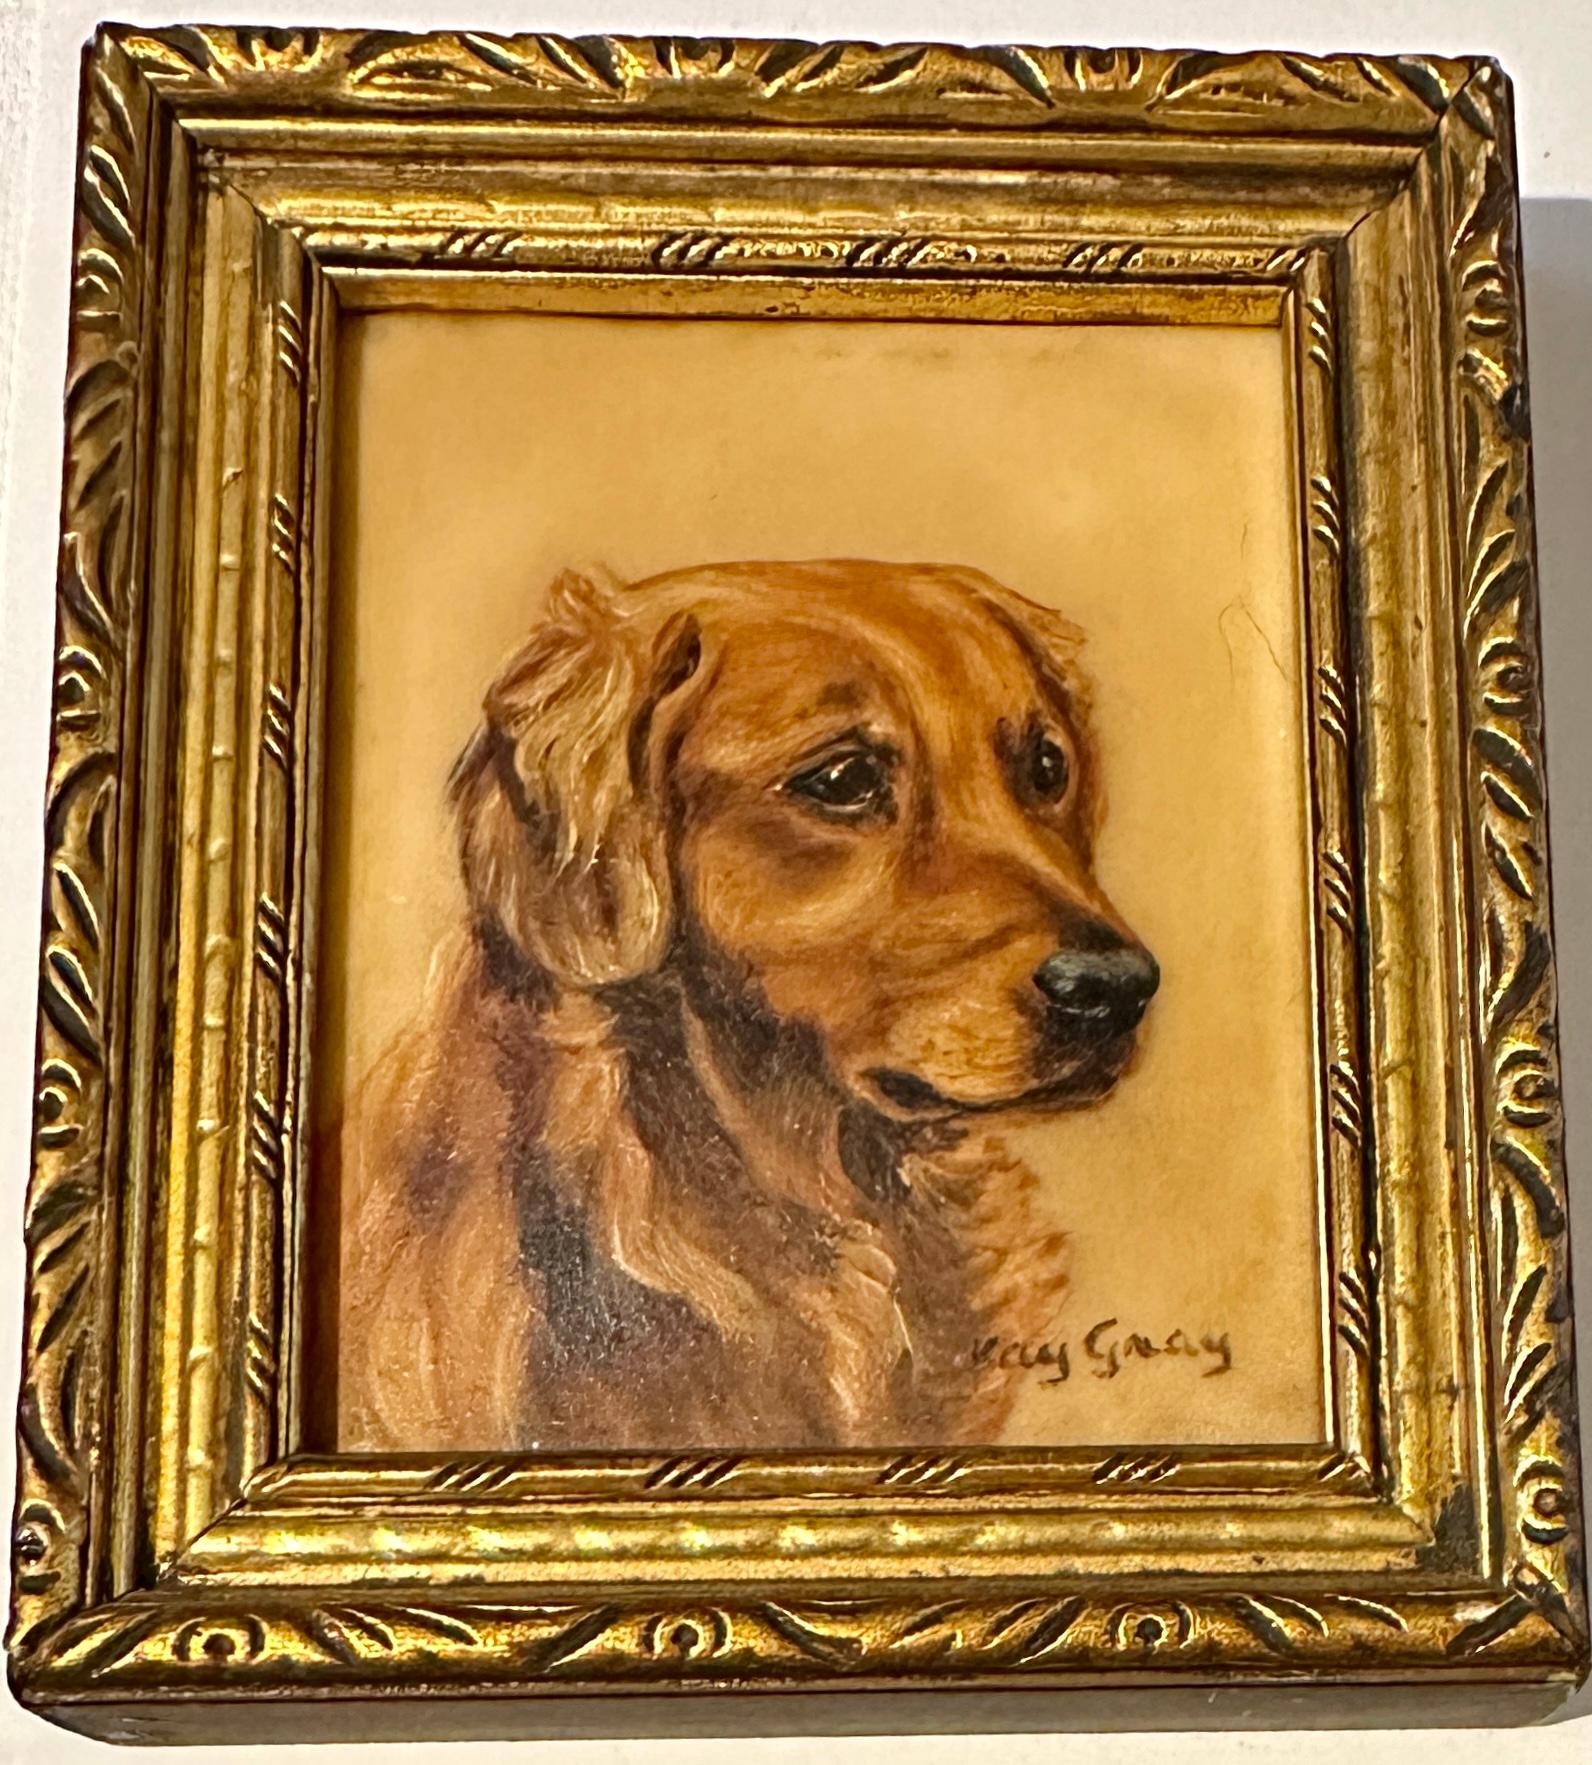 Kate Gray Portrait Painting - English mid century oil painting Portrait of Golden Retriever puppy or dog